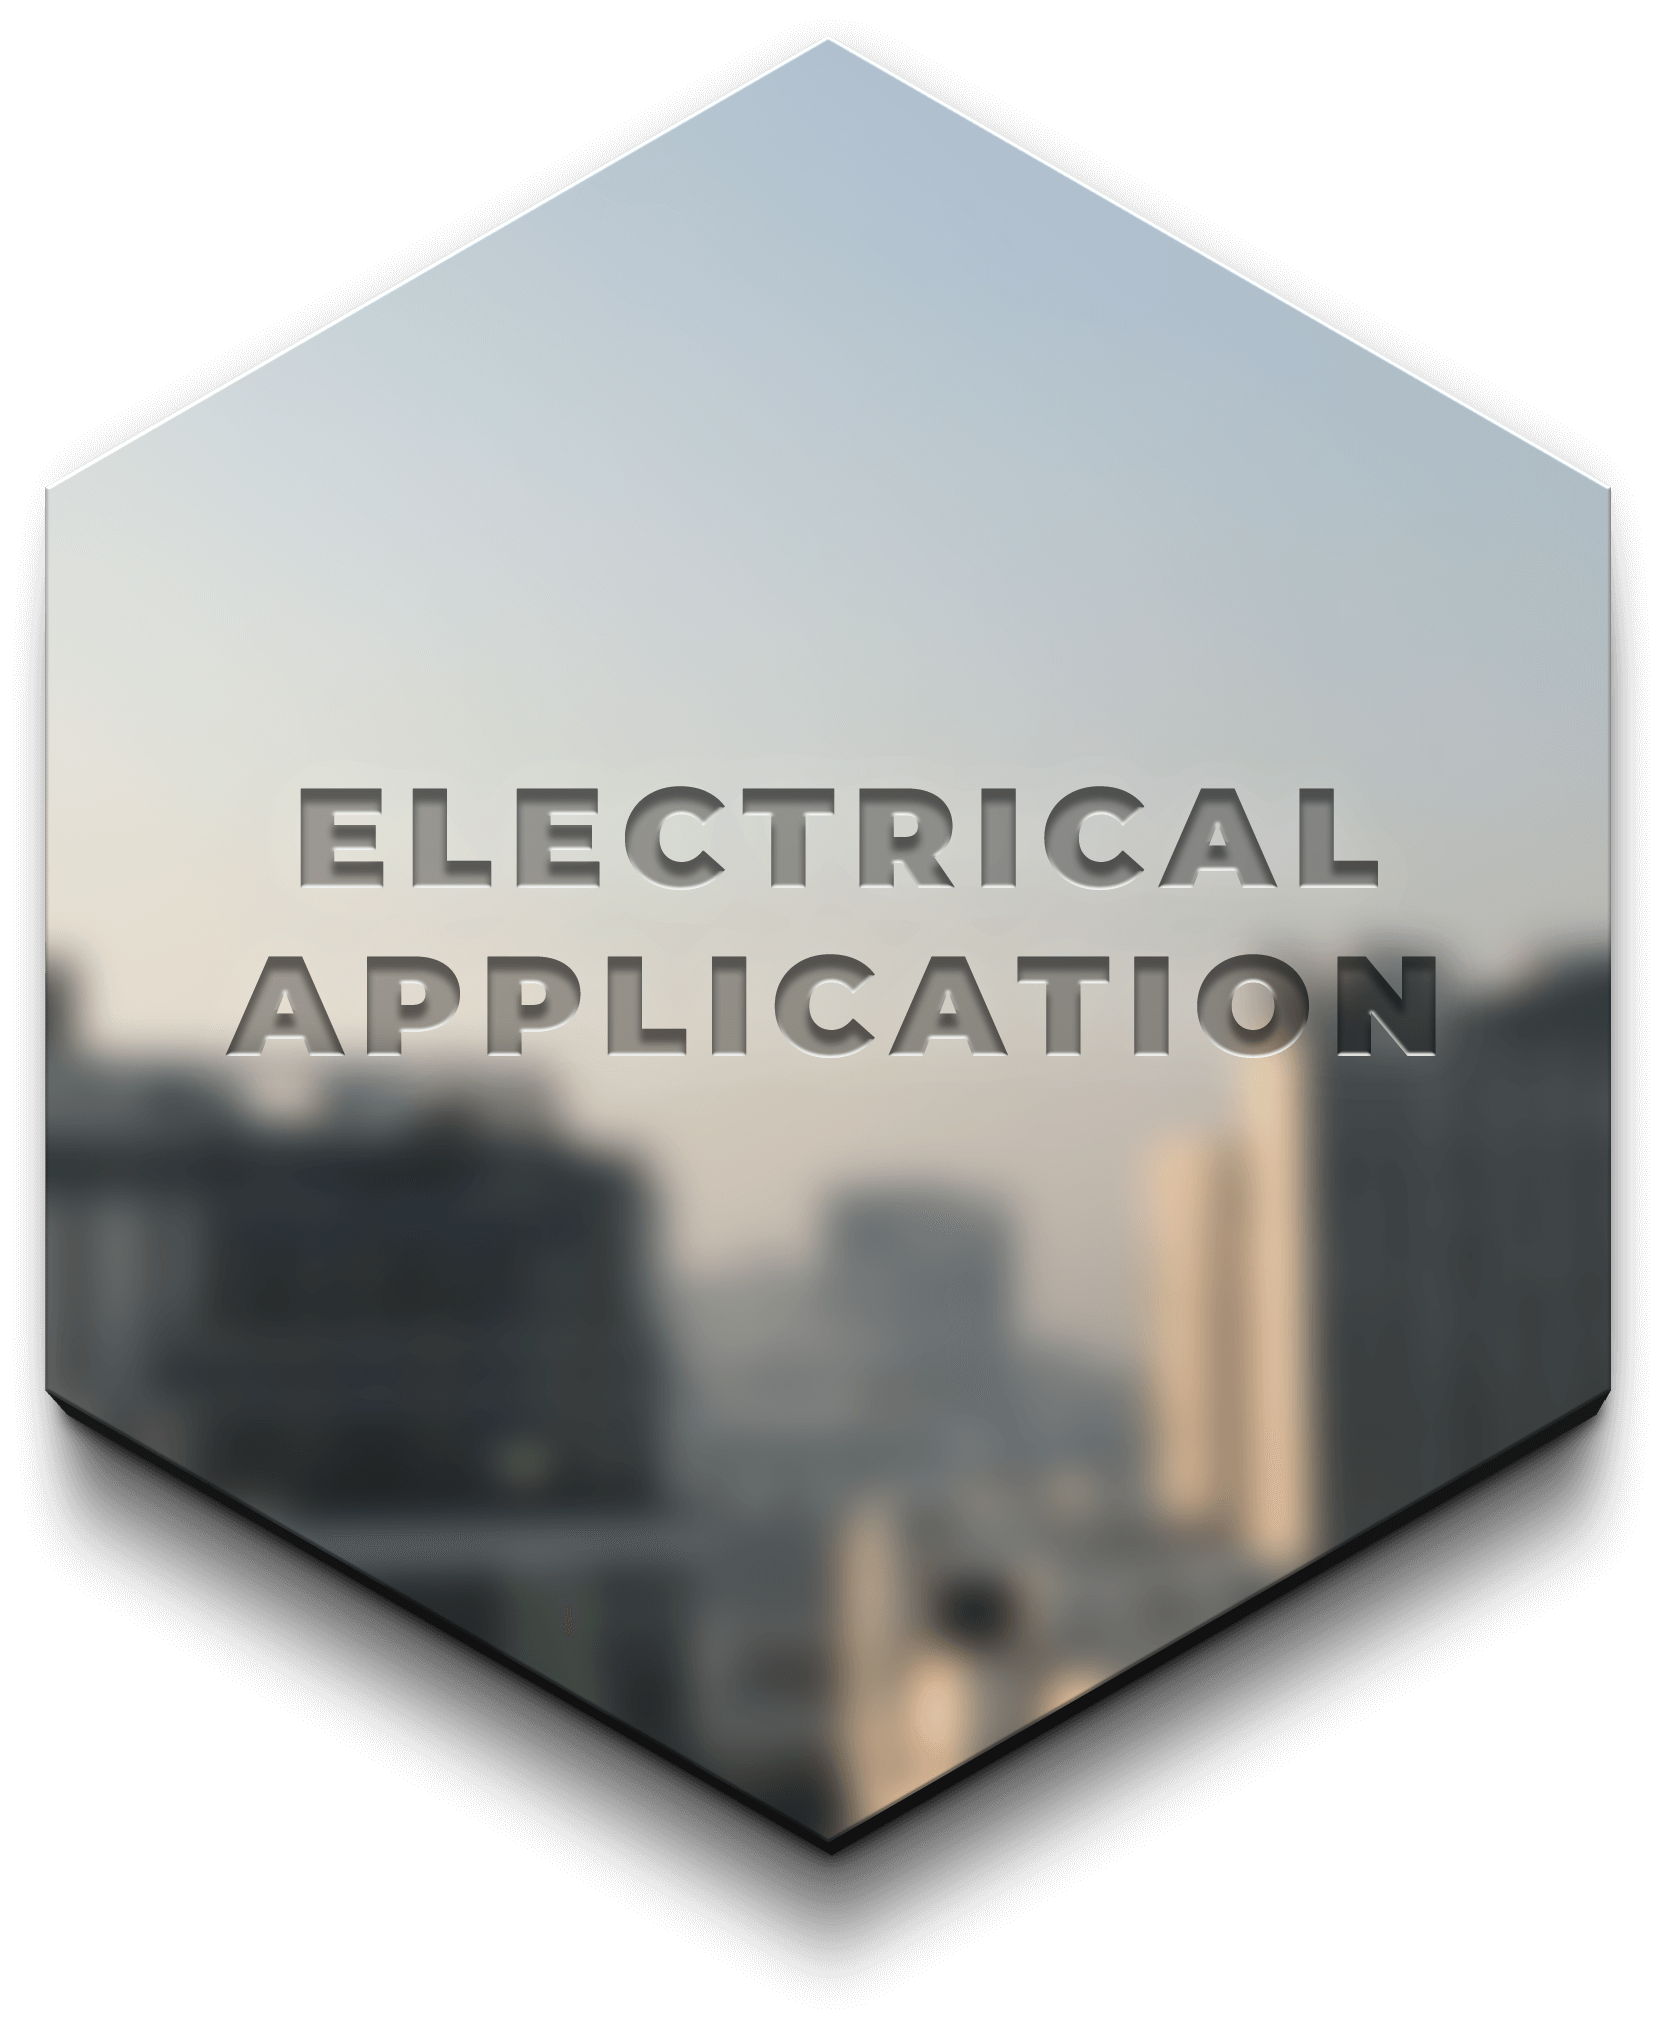  Electrical application